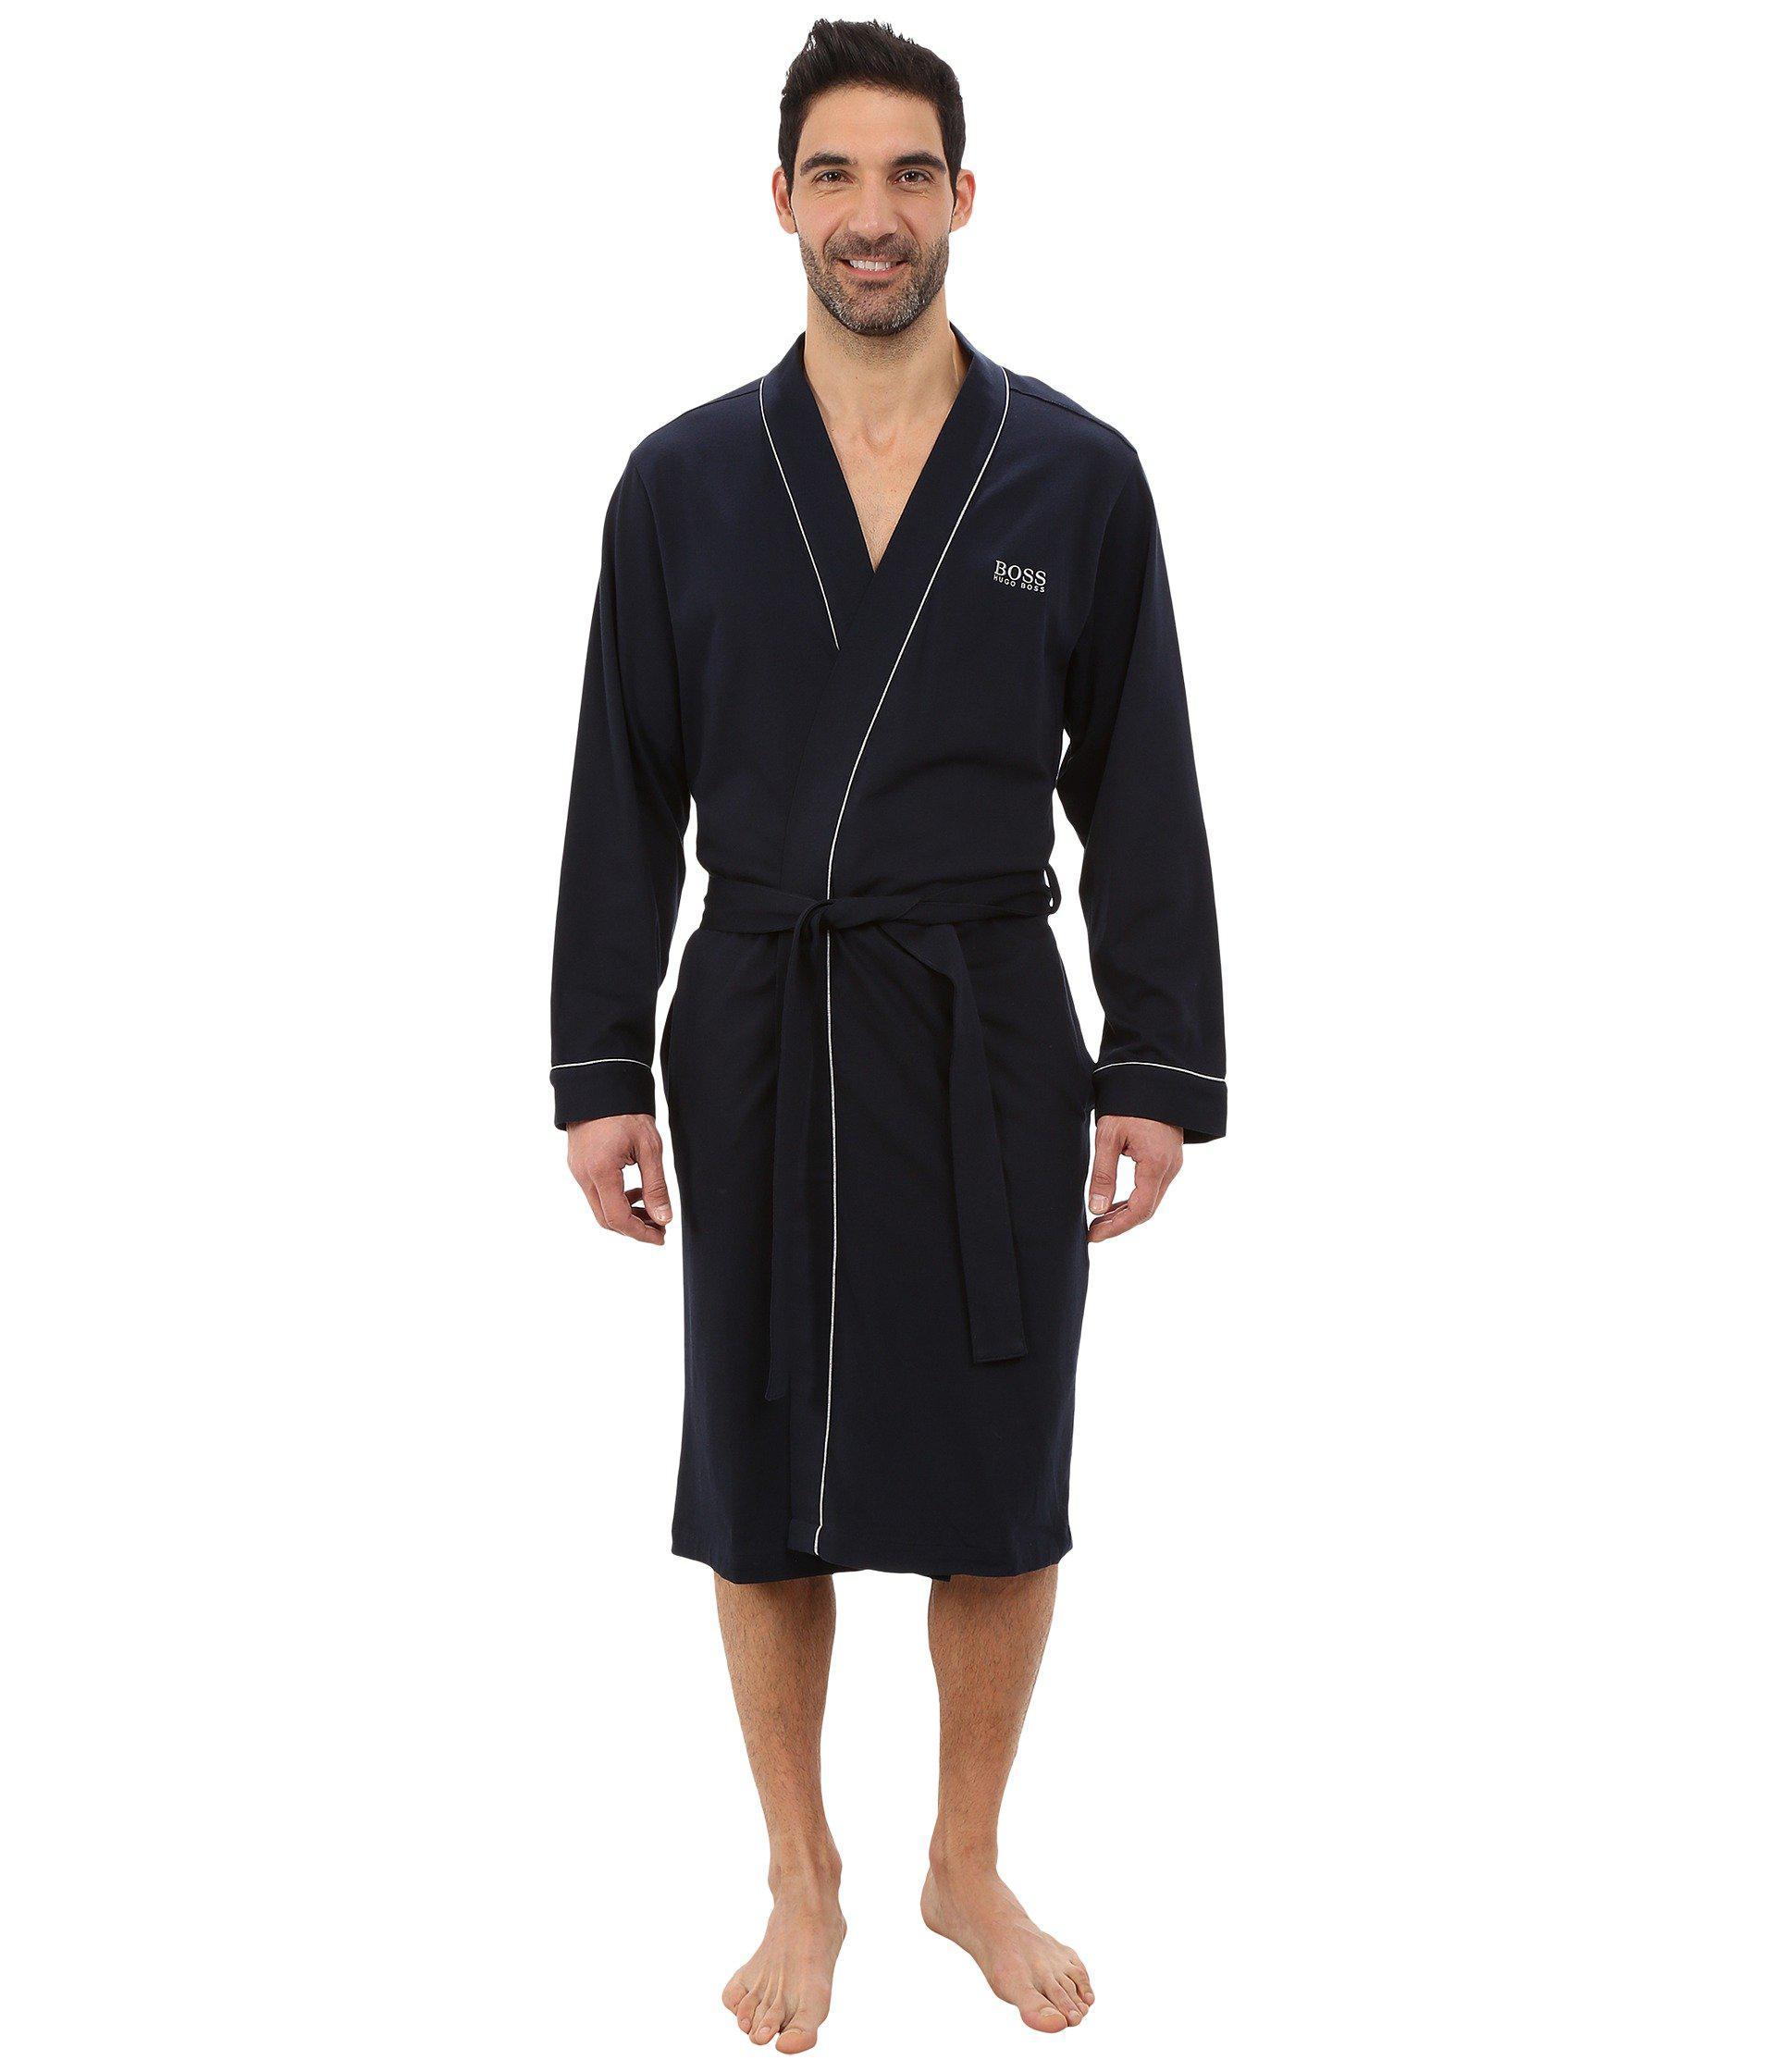 BOSS by Hugo Boss Piped Cotton Robe in Navy (Blue) for Men - Save 17% ...